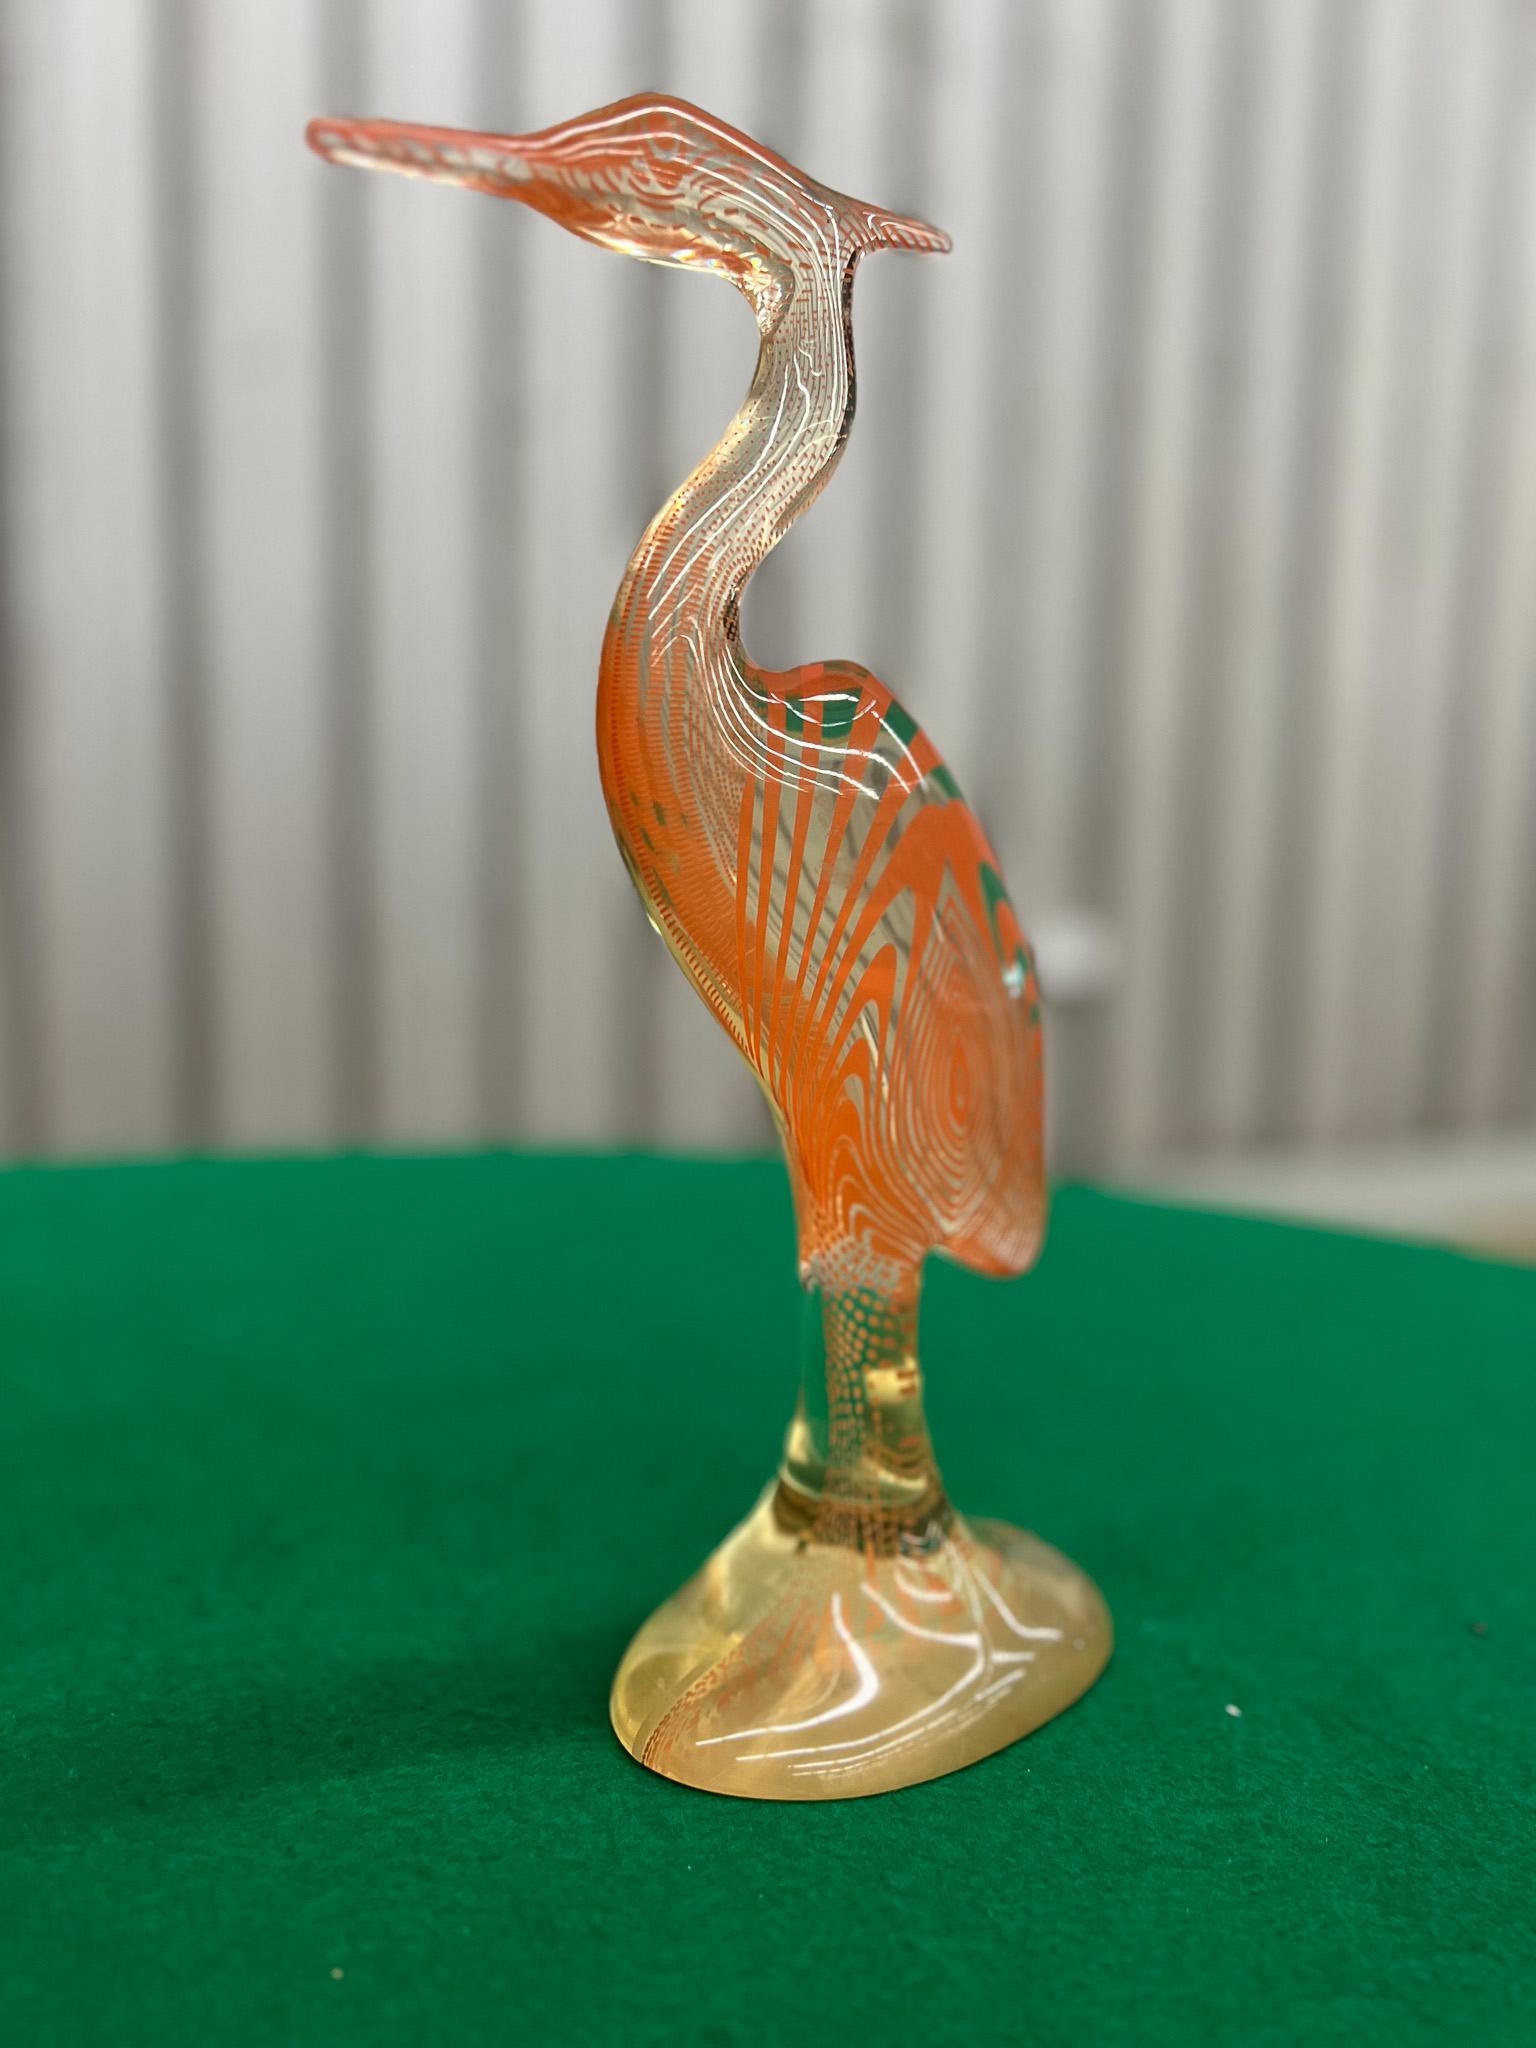 Available today, this Brazilian Modern Kinetic Sculpture of a Heron in Resin by Abraham Palatinik made in the 1960s is gorgeous!

This is part of the Artemis collection that features hundreds of different animals, each with sleek, flat